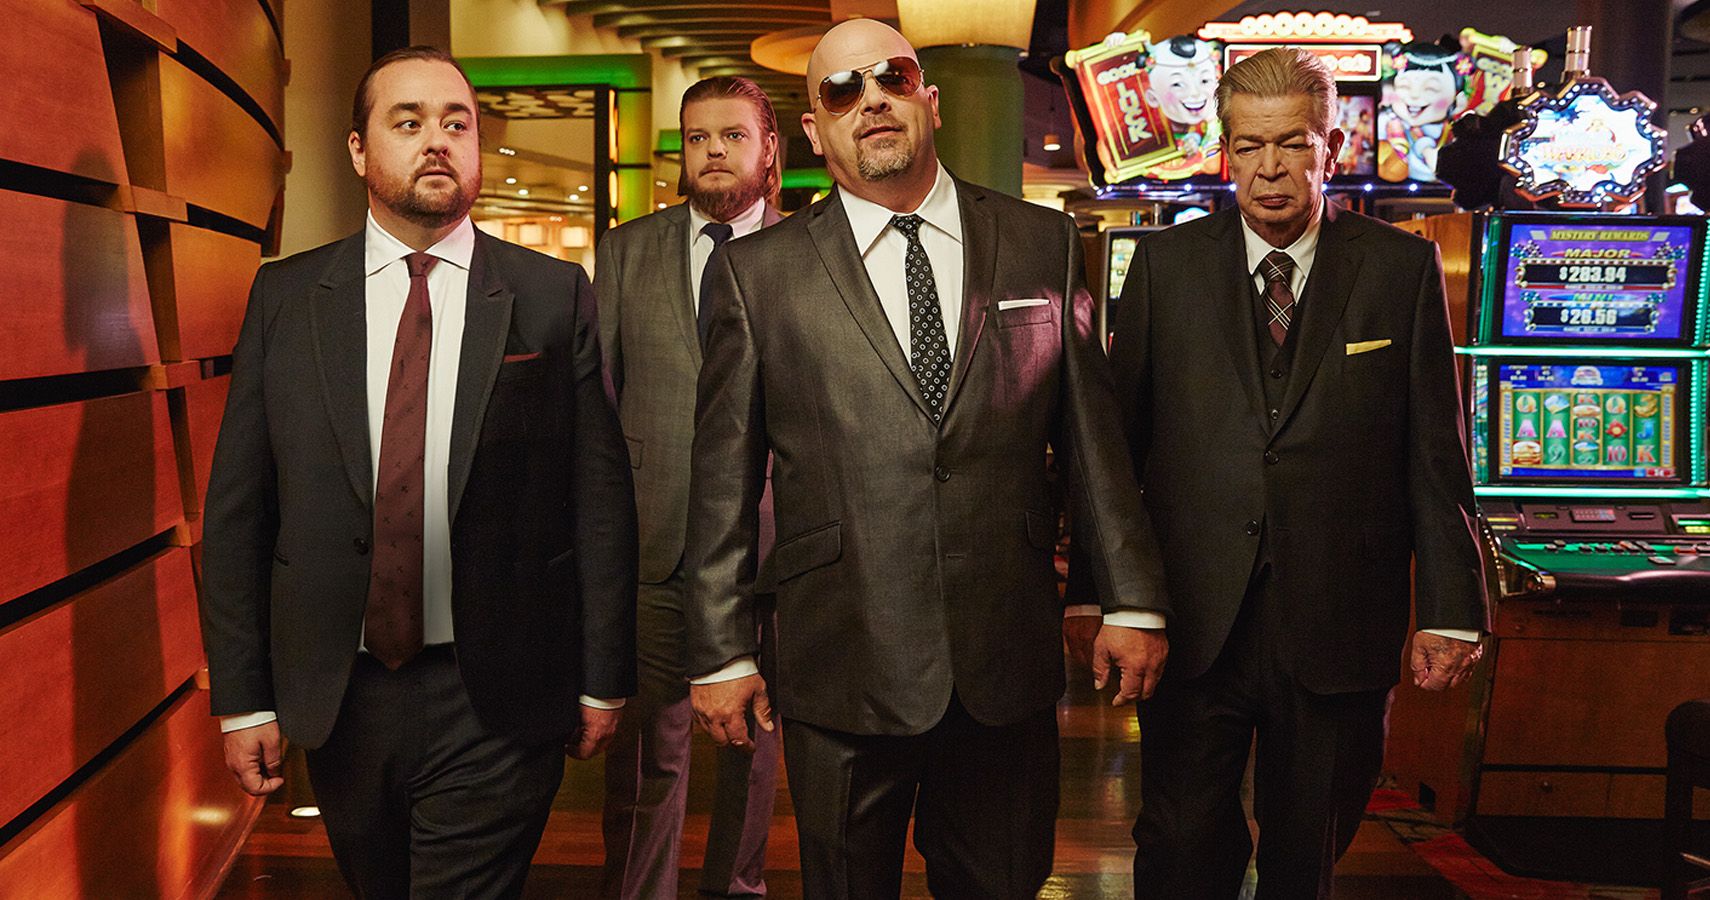 20 Rules Sellers On Pawn Stars Are Made To Follow